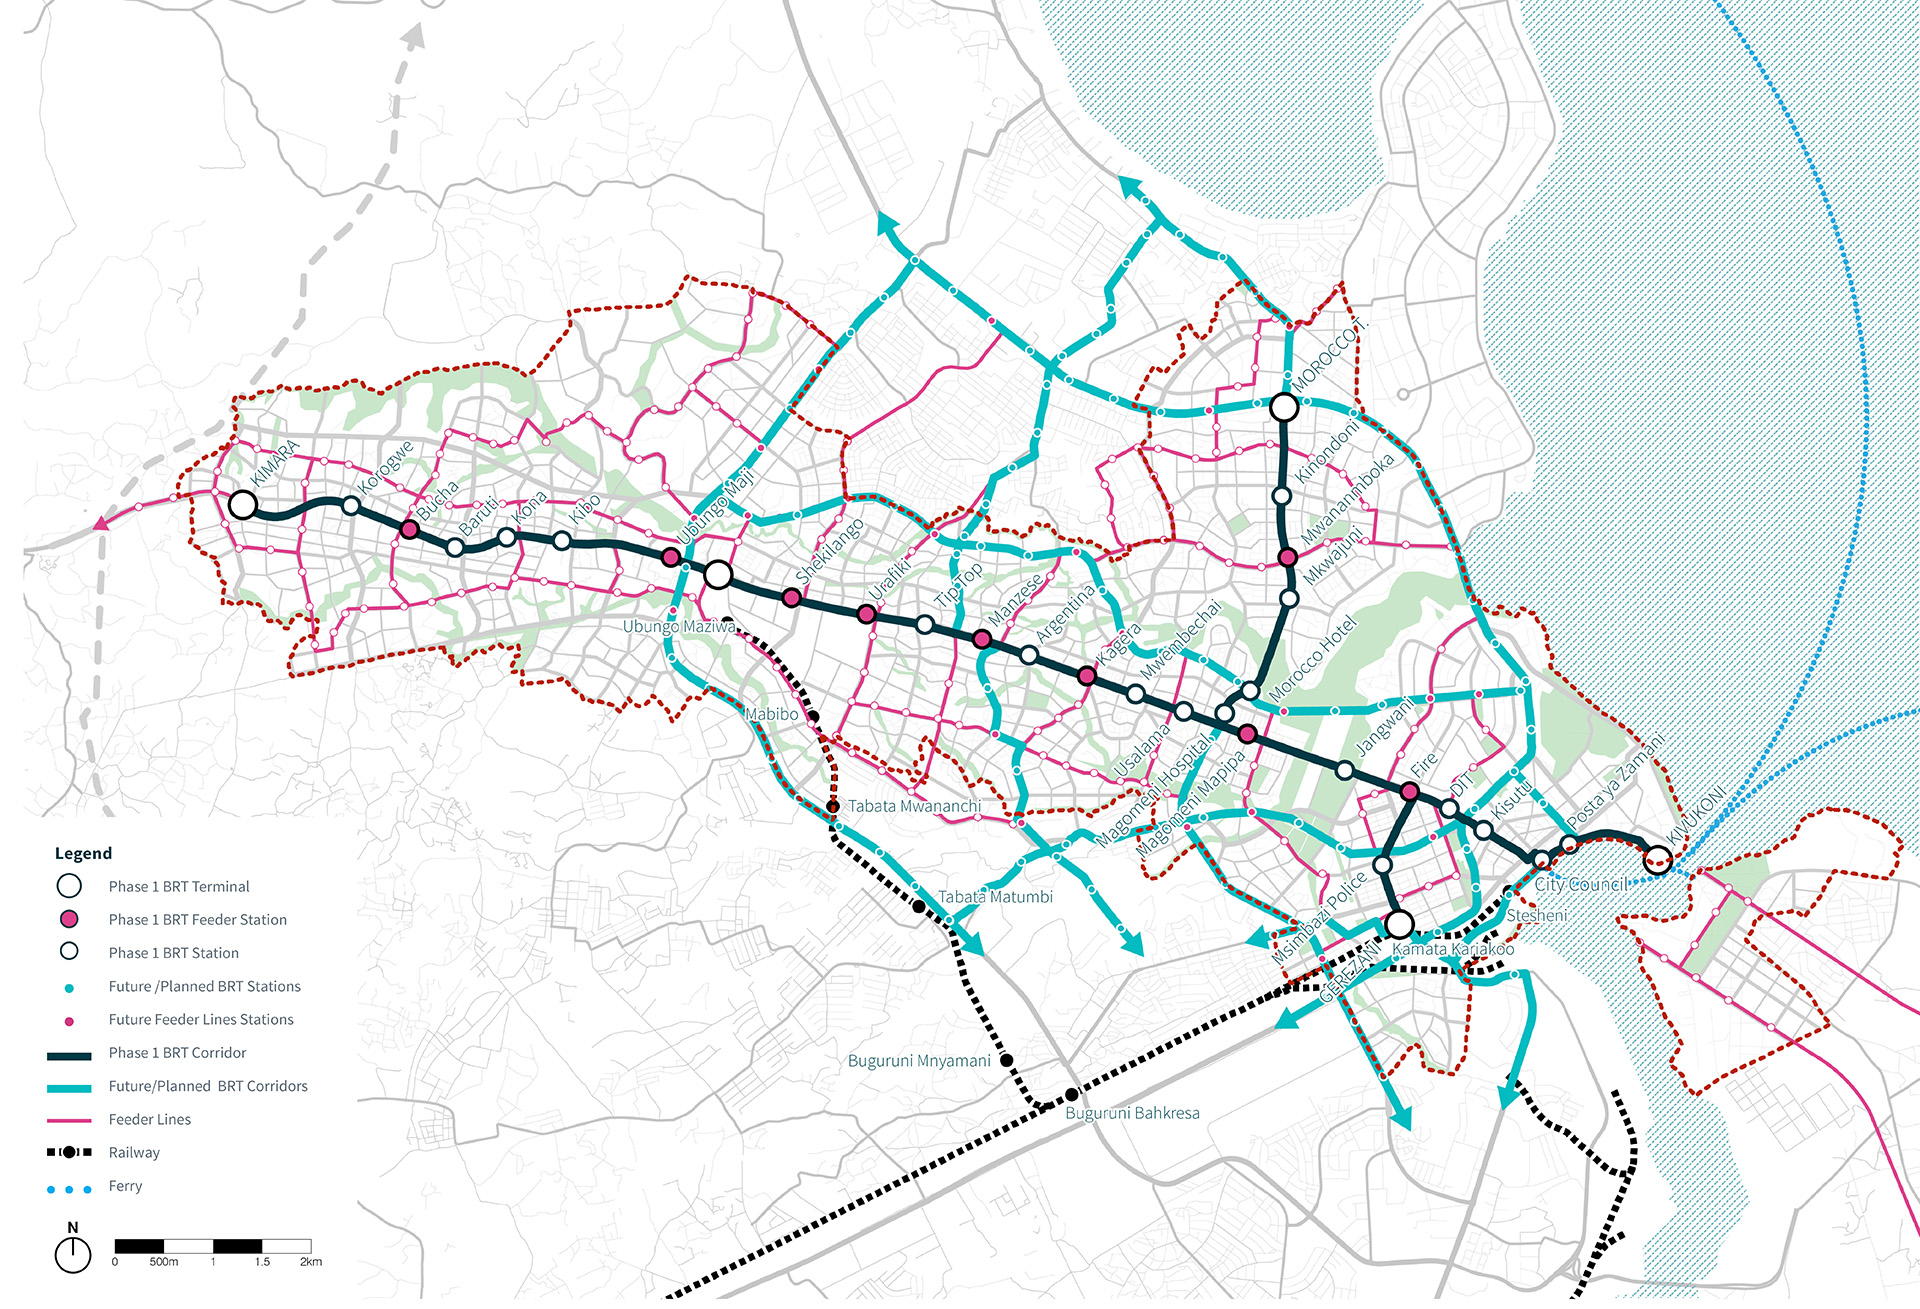 Full implementation of the public transportation network within the corridor development area: the final phase will result in an integrated and connected network of the three levels of public transportation, including a core network of high frequency lines (BRT and feeder lines) complemented by a dense network of medium frequency lines